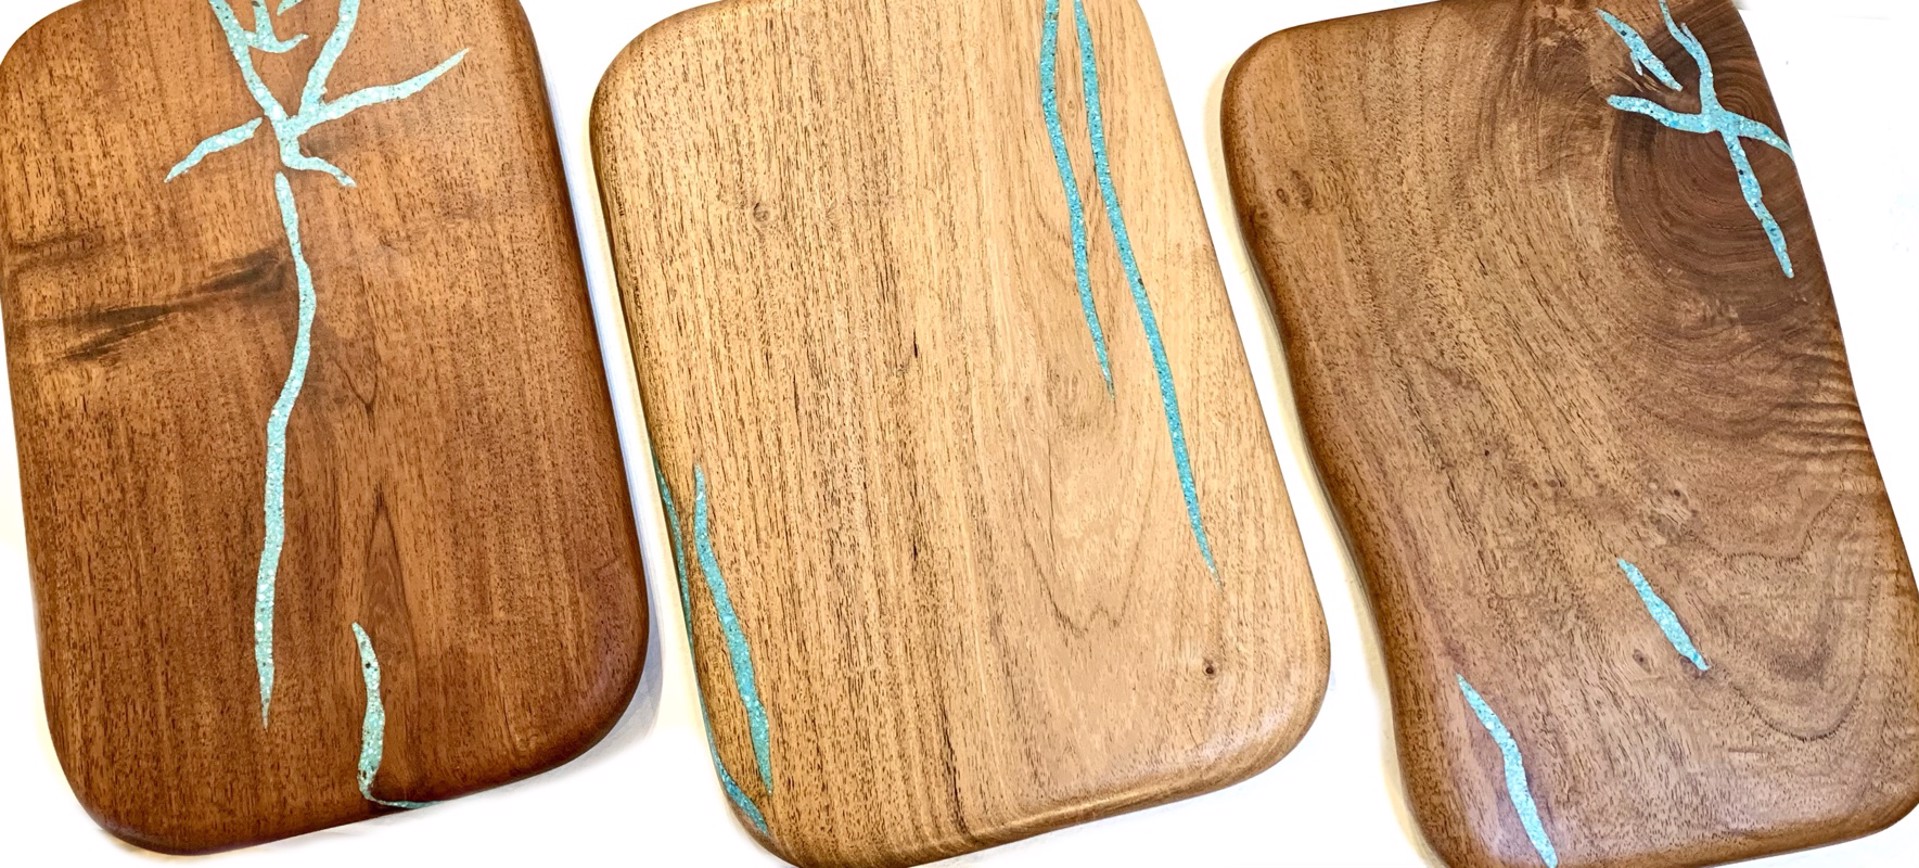 Cheese Plate - Medium Mesquite with Turquoise Inlay by TreeStump Woodcraft